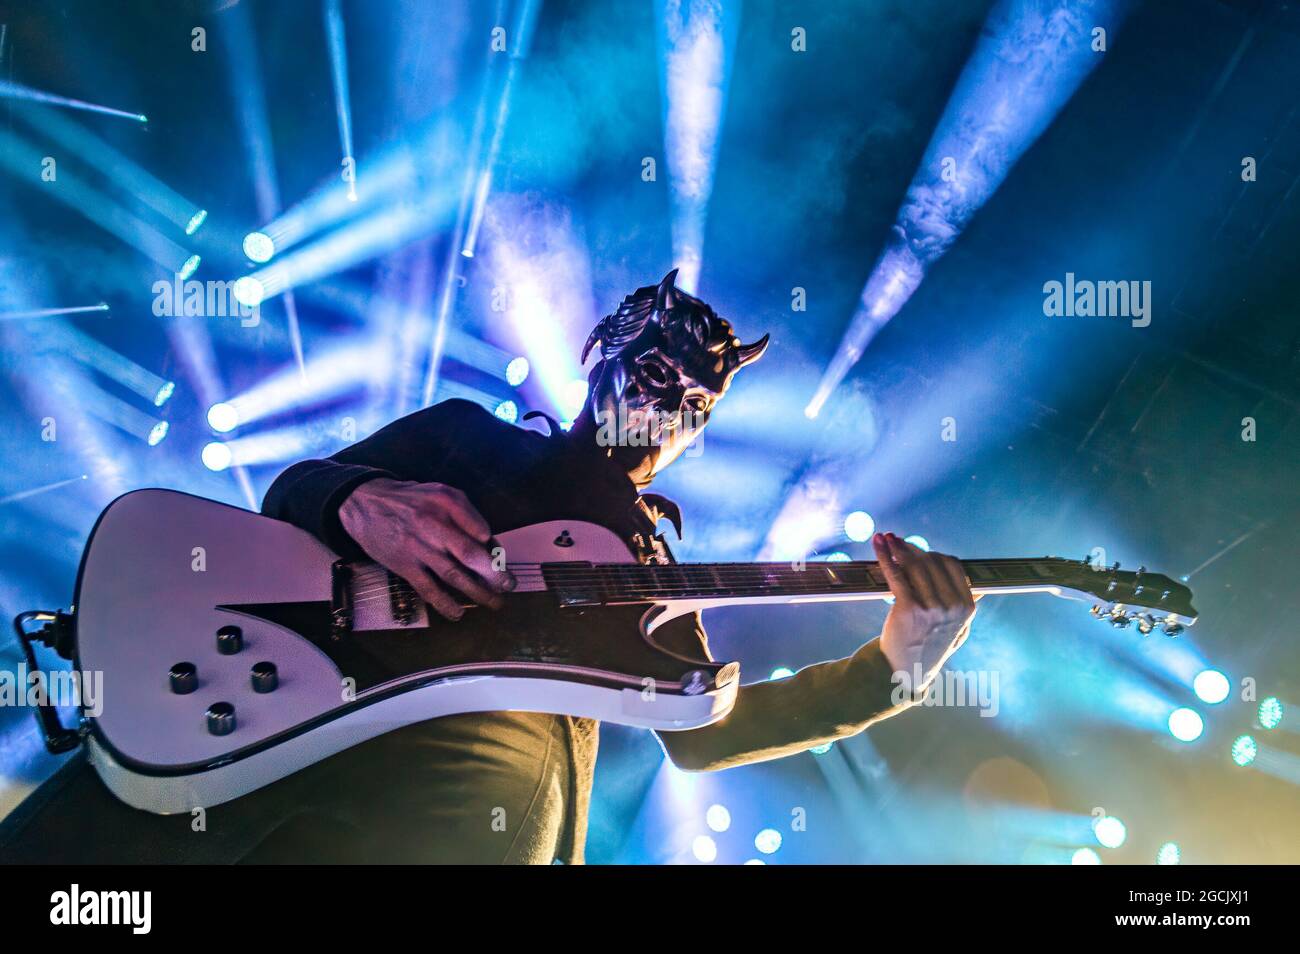 LONDON, UNITED KINGDOM - Nov 22, 2019: A guitarist ''nameless ghoul'' from  rock band Ghost playing guitar in London at The SSE Arena, Wembley Stock  Photo - Alamy